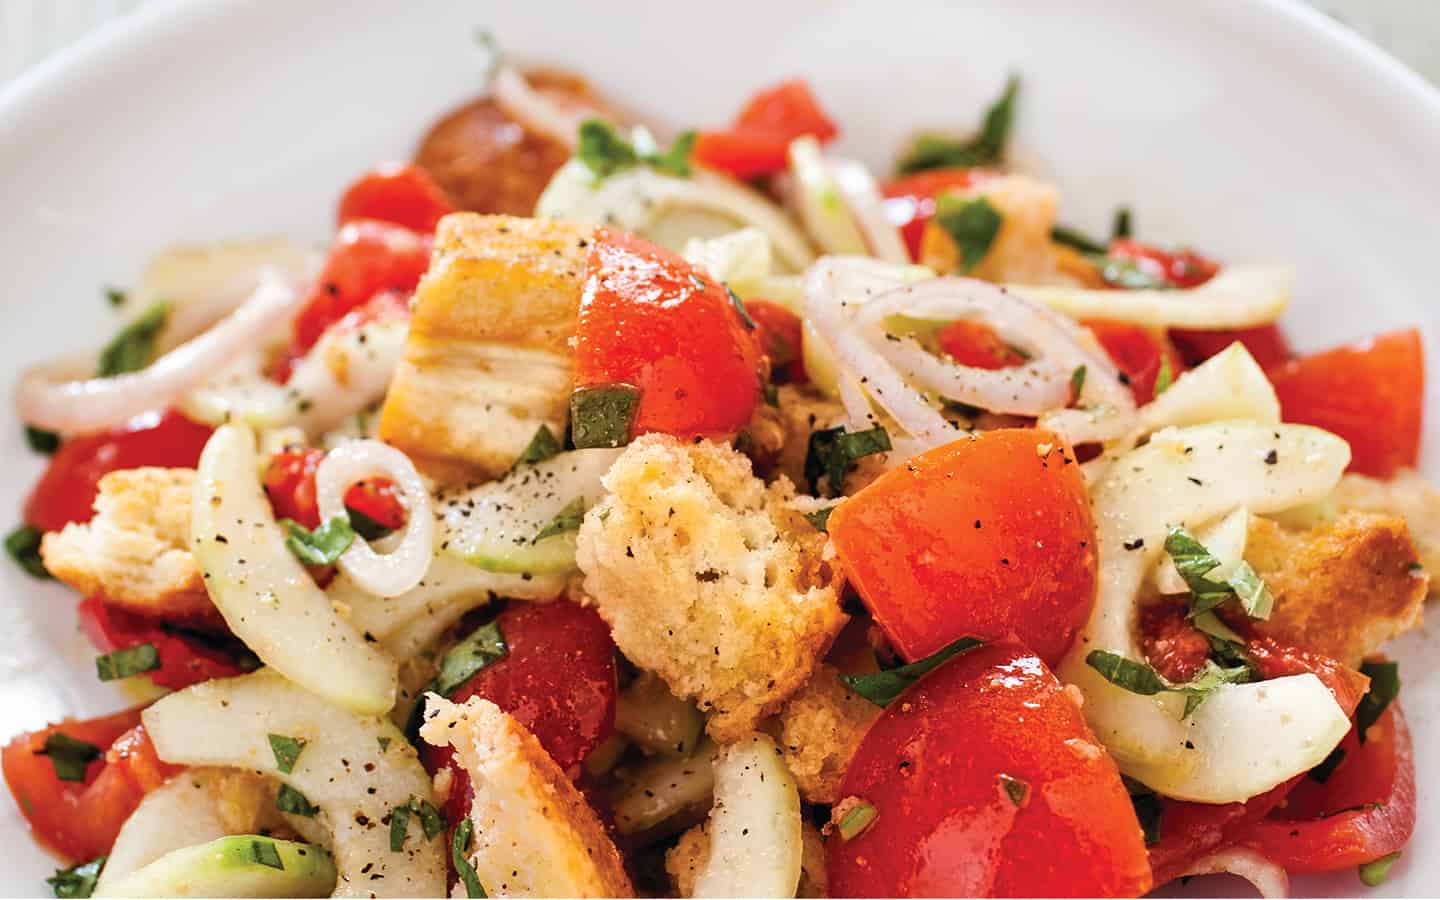 This Italian bread salad is the second-best way to eat ripe summer tomatoes